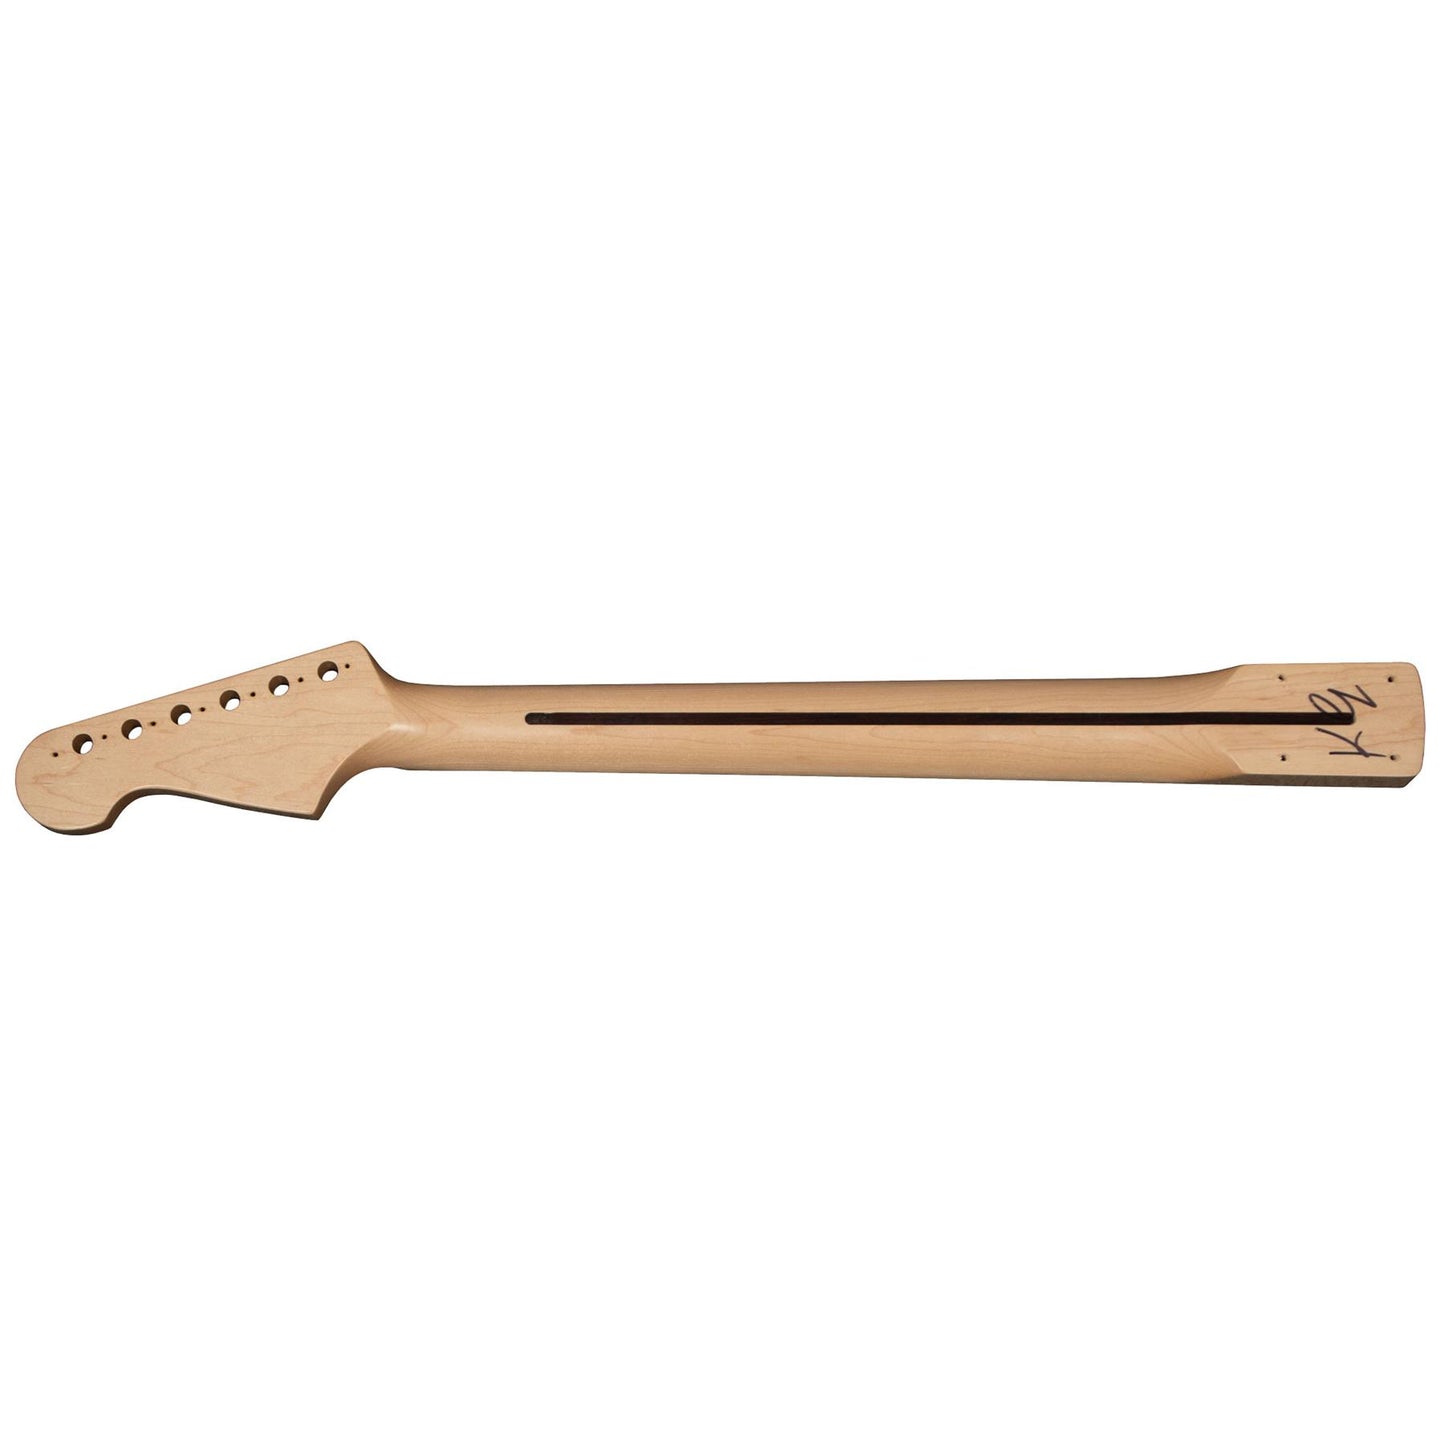 B Stock Stratocaster Compatible Guitar Neck -  Rosewood Fretboard Satin